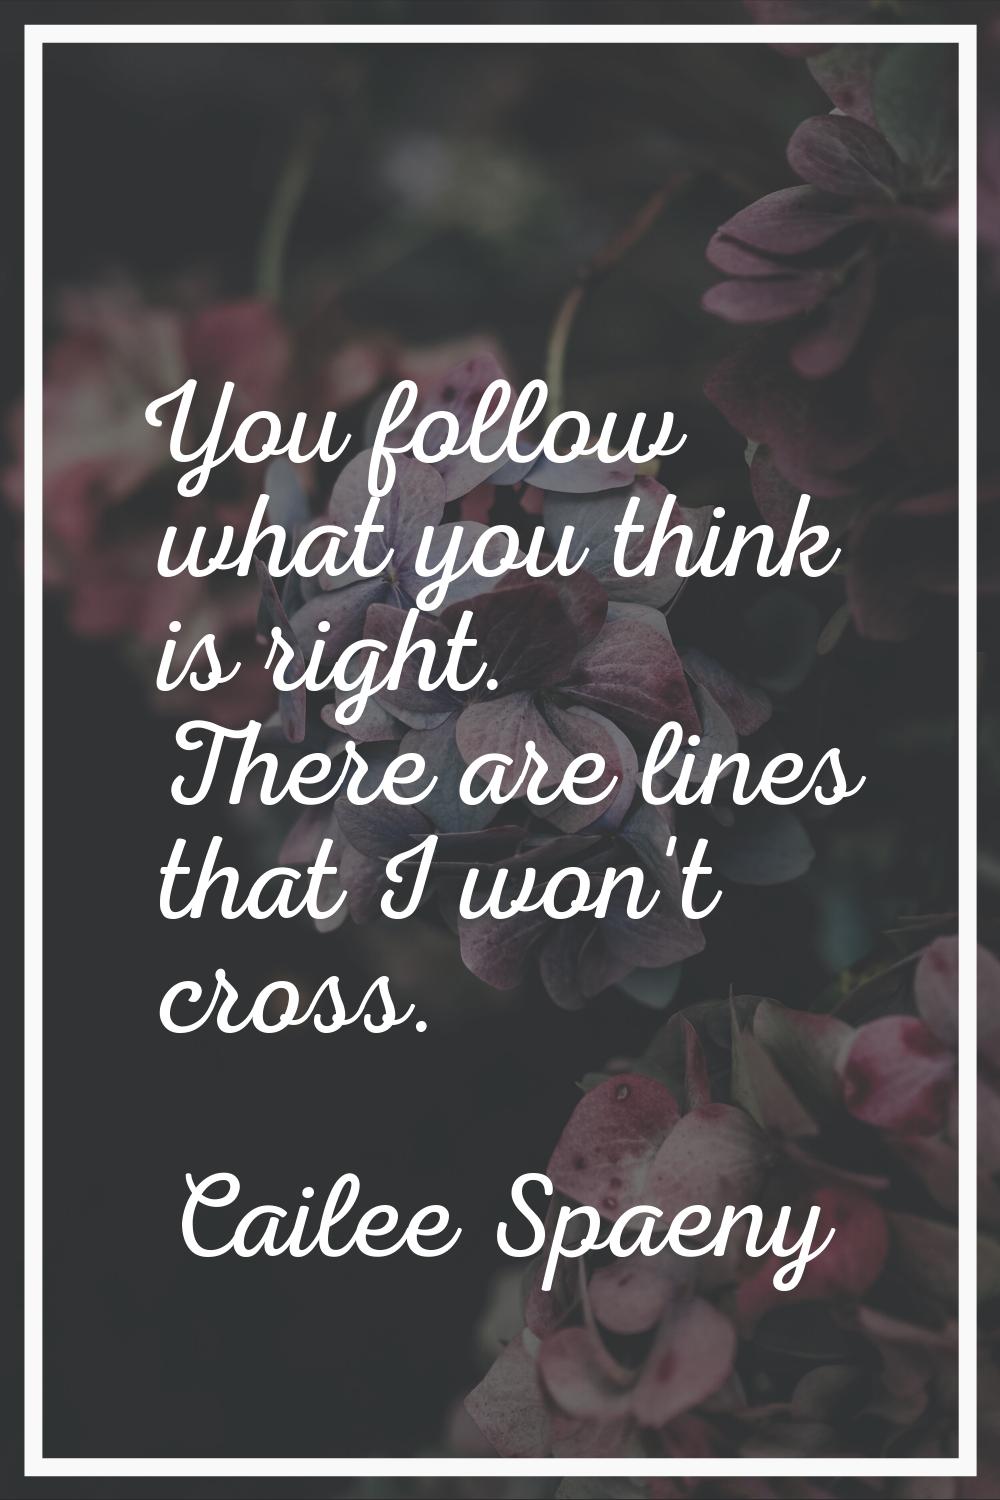 You follow what you think is right. There are lines that I won't cross.